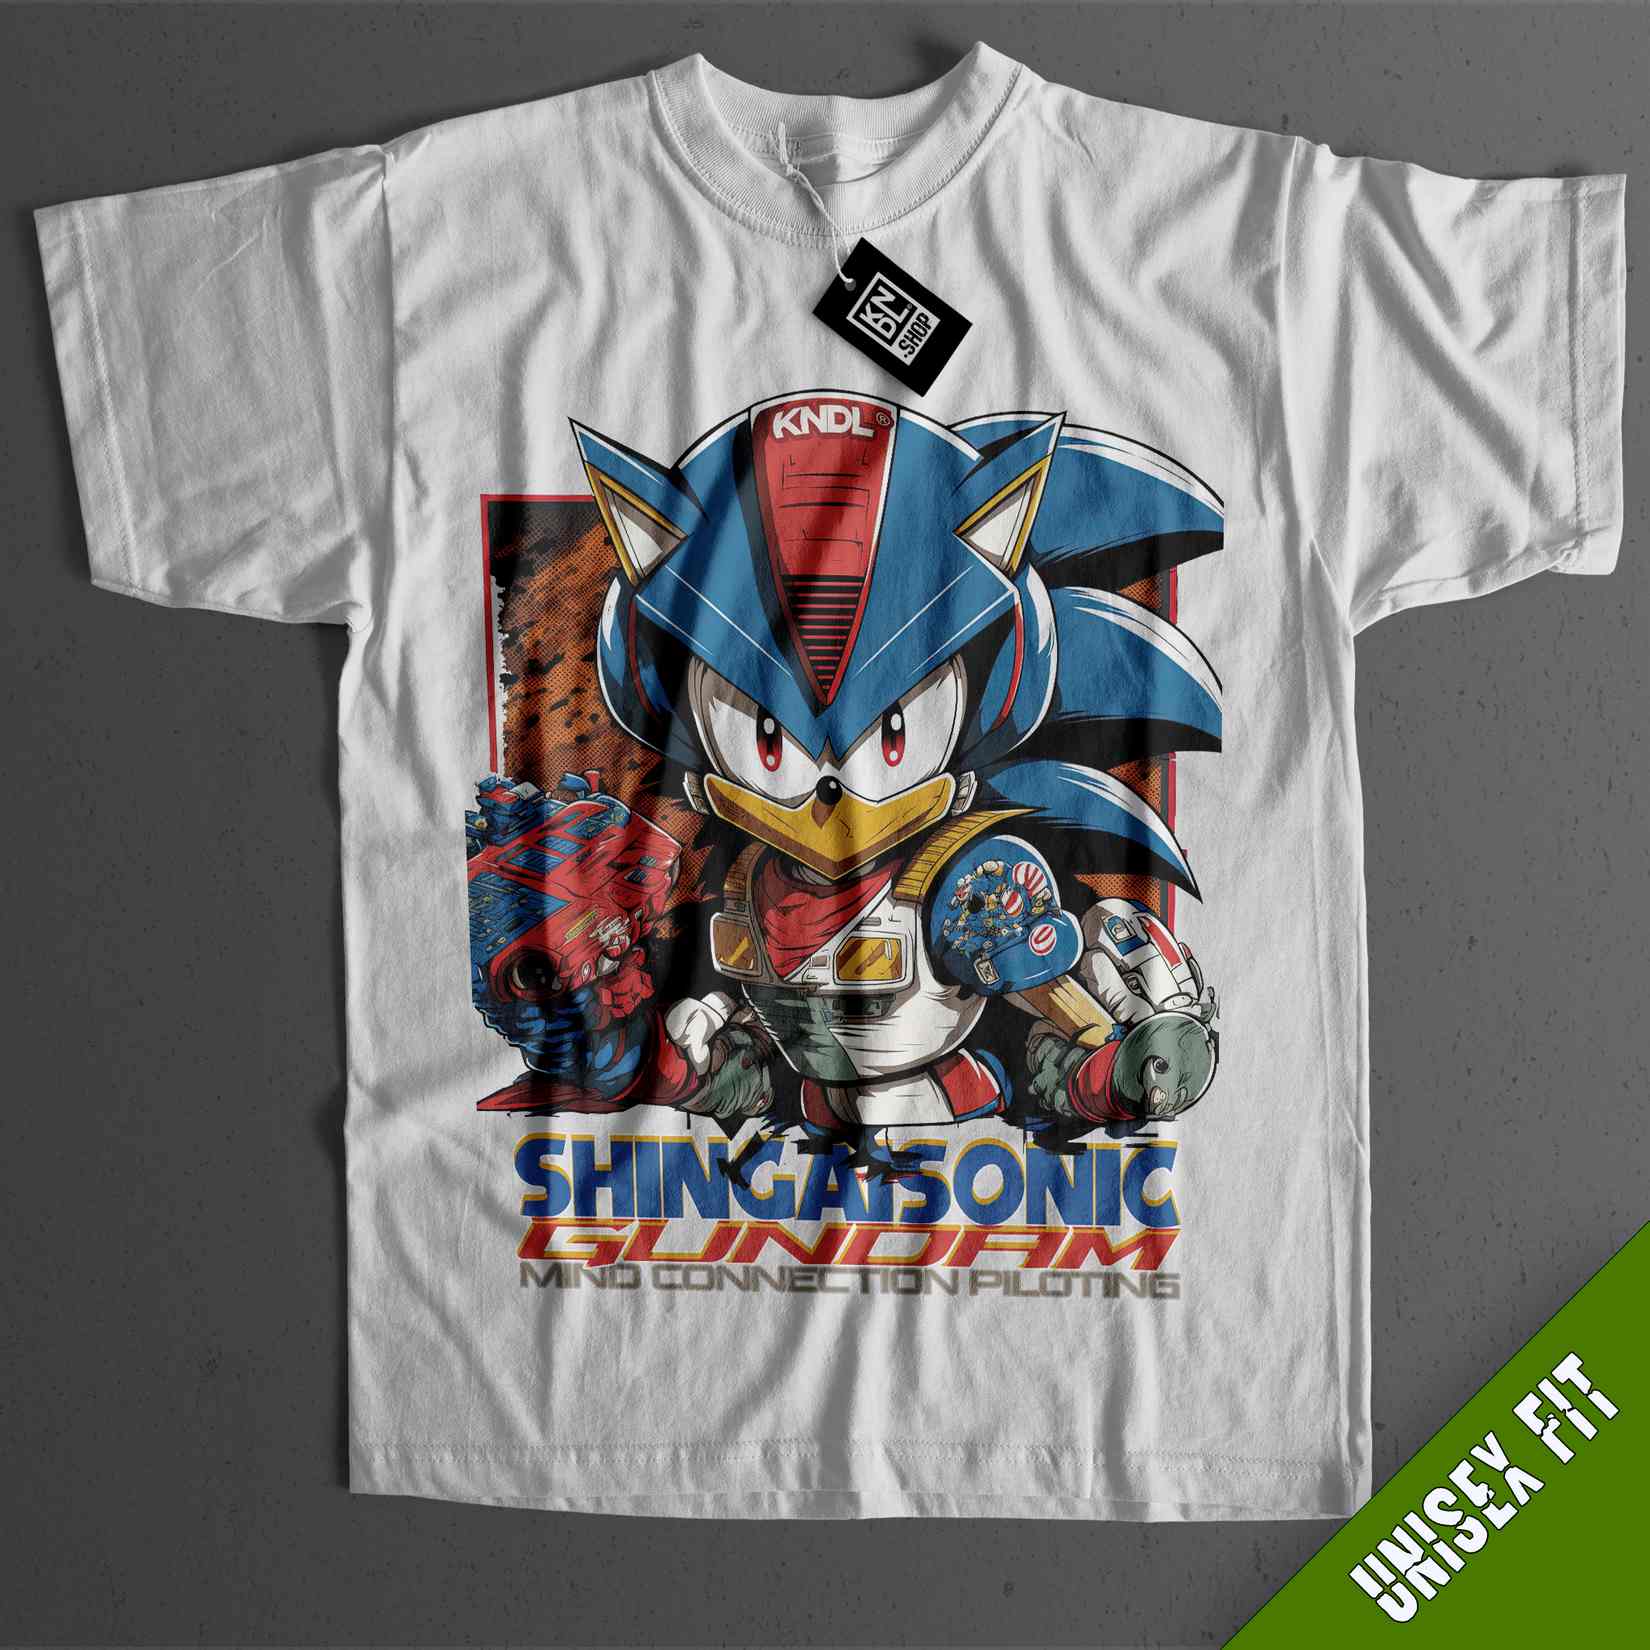 a white shirt with an image of a sonic character on it